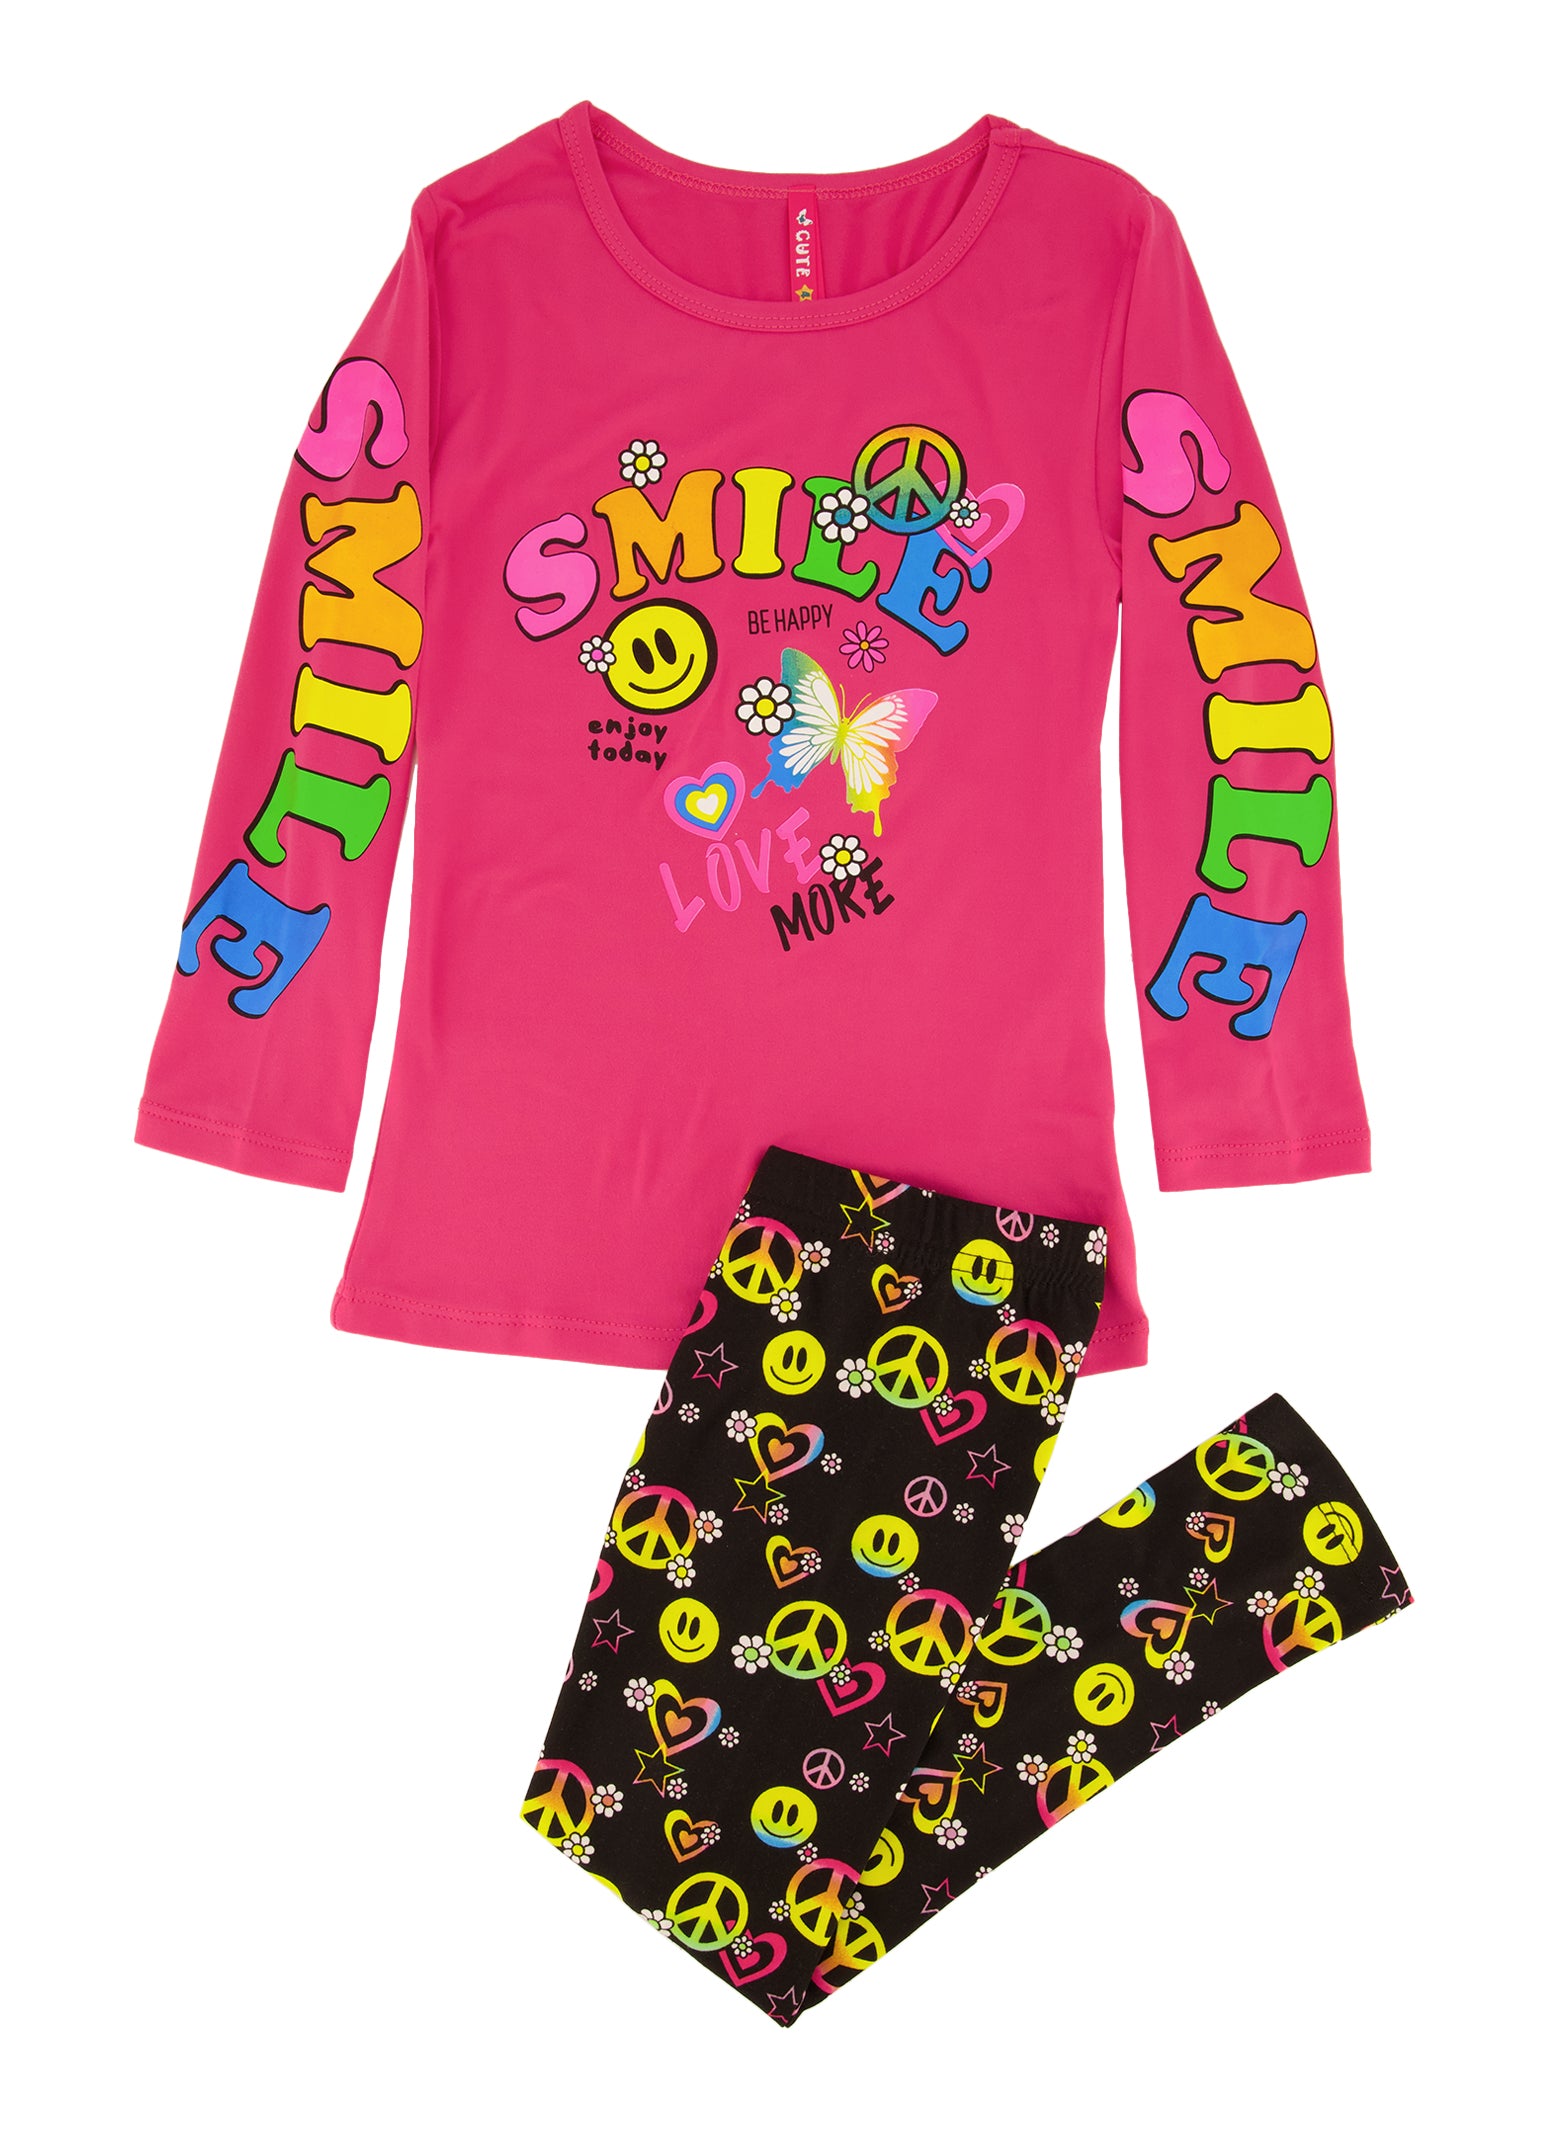 Little Girls Smile Smiley Graphic Print Top and Leggings Set,